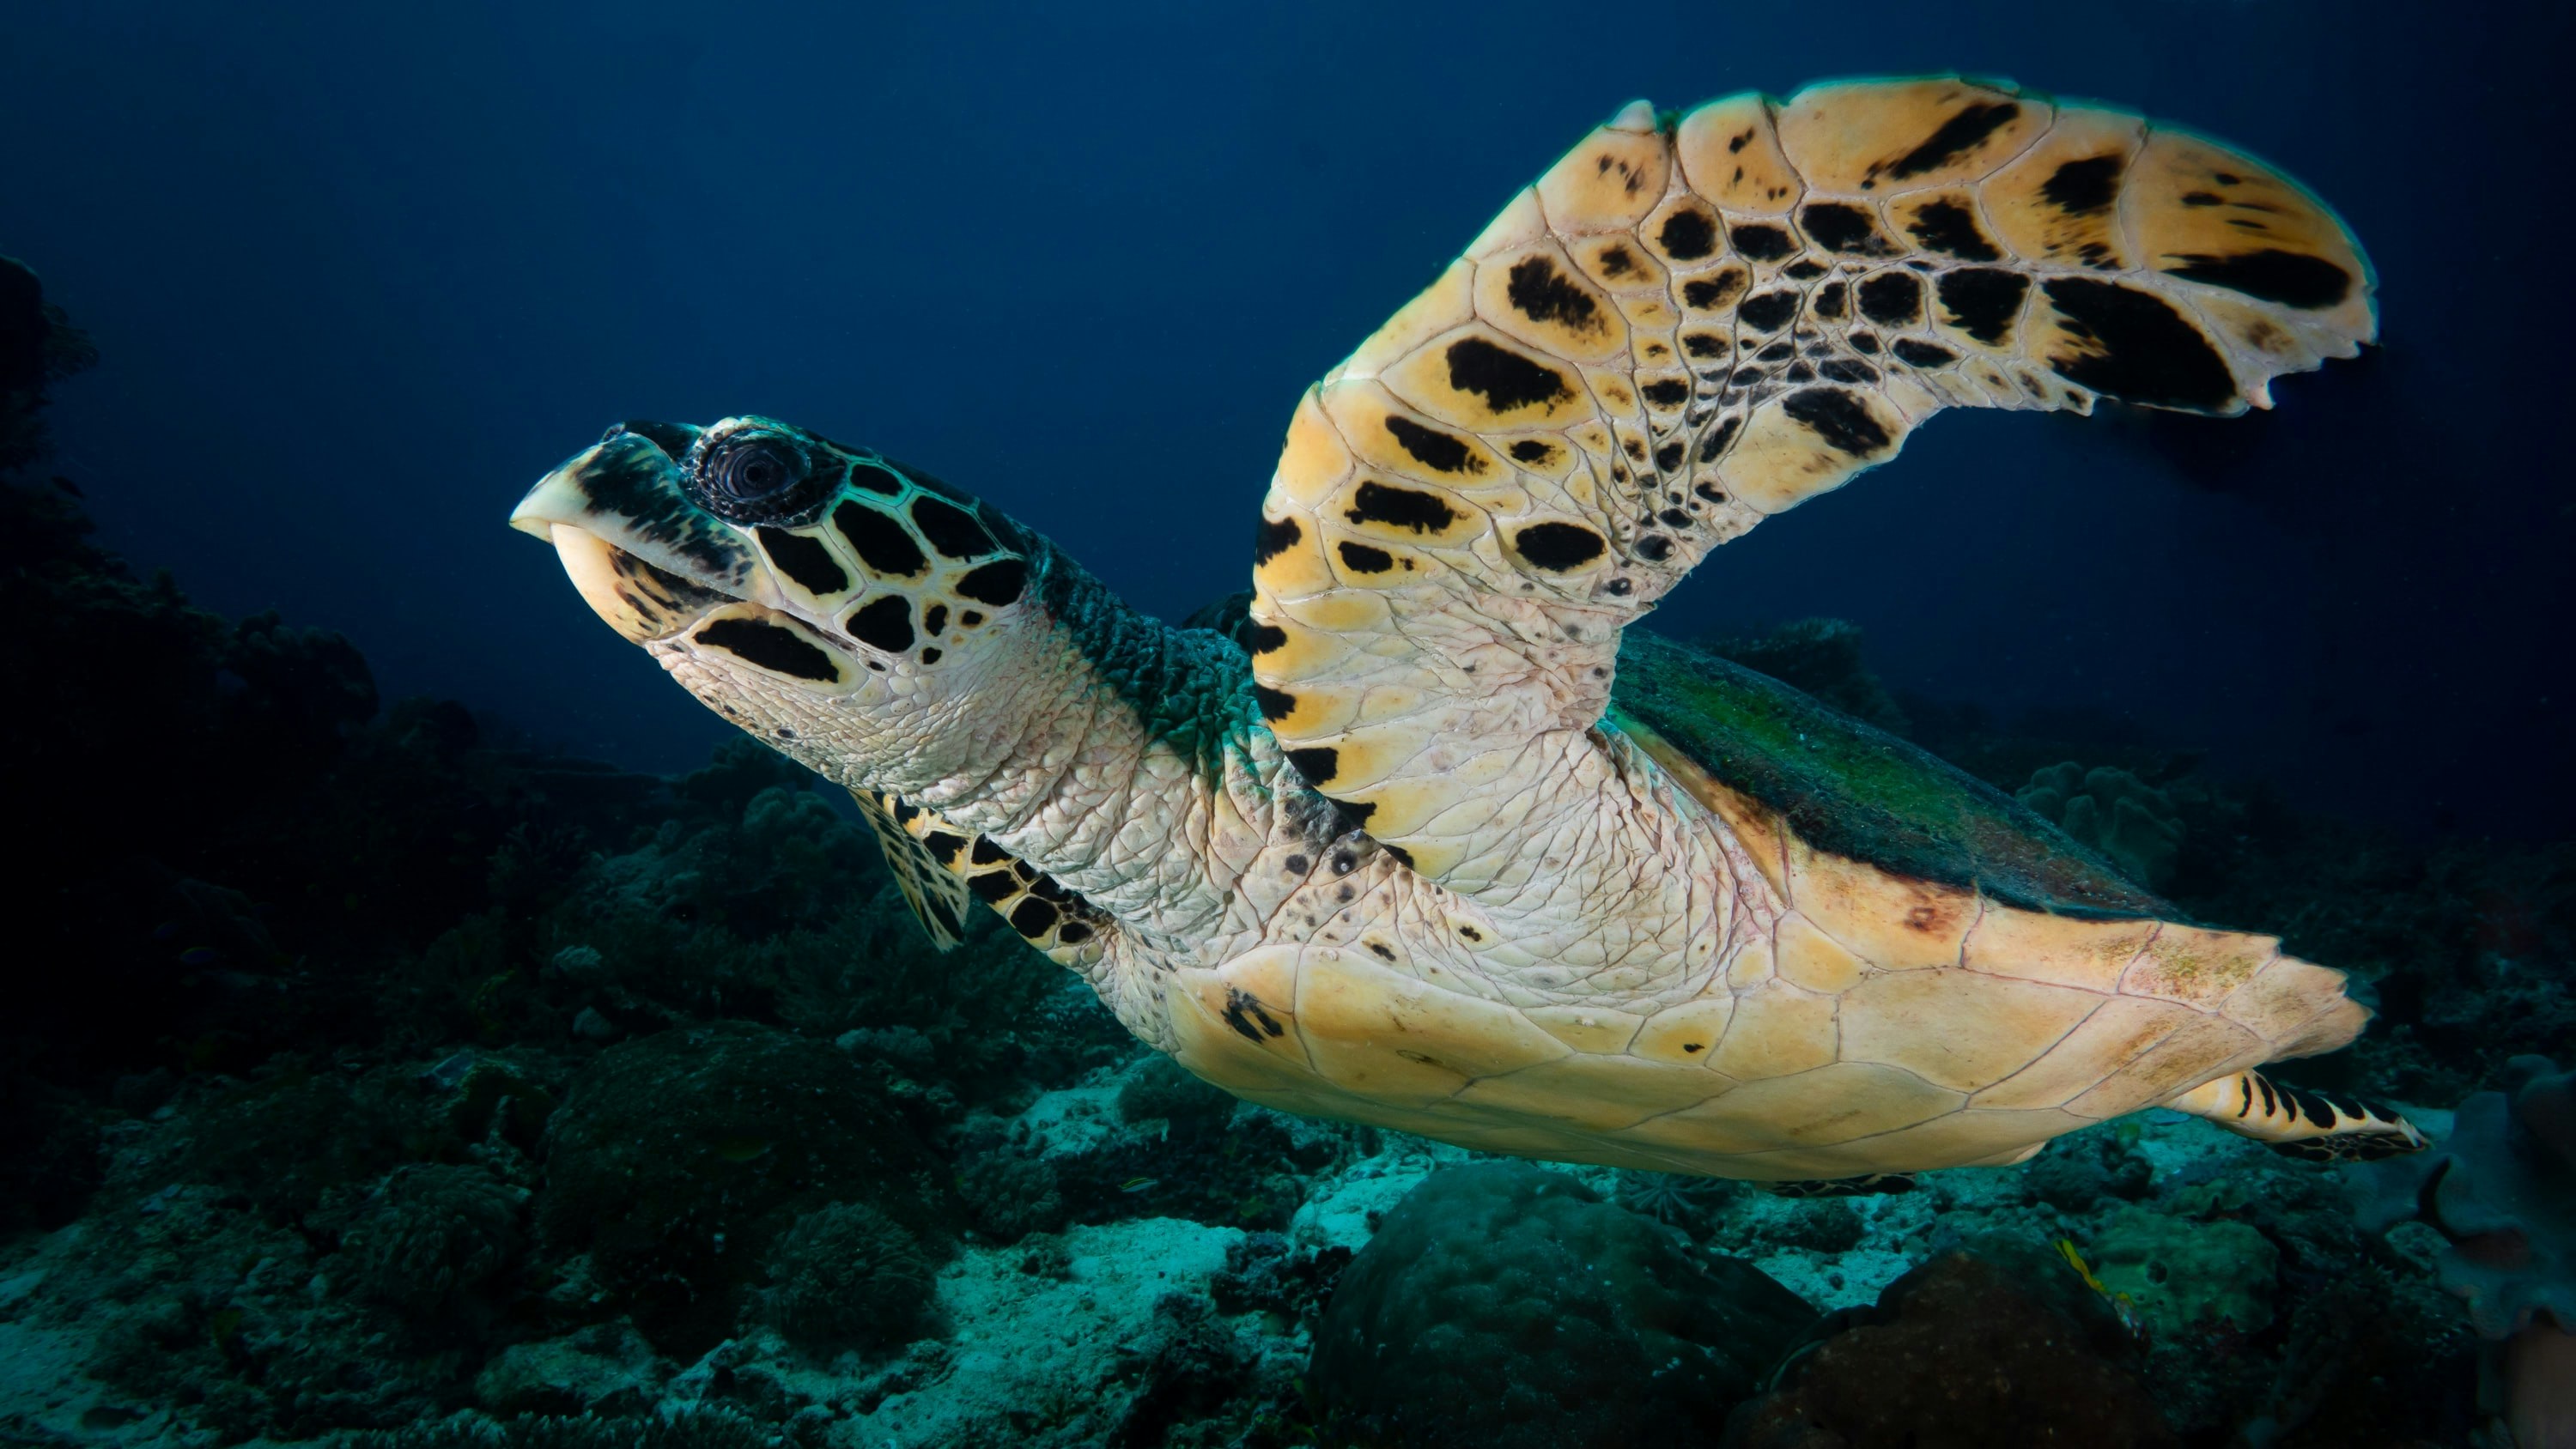 a close up of a sea turtle with a sharp curved beak, underwater